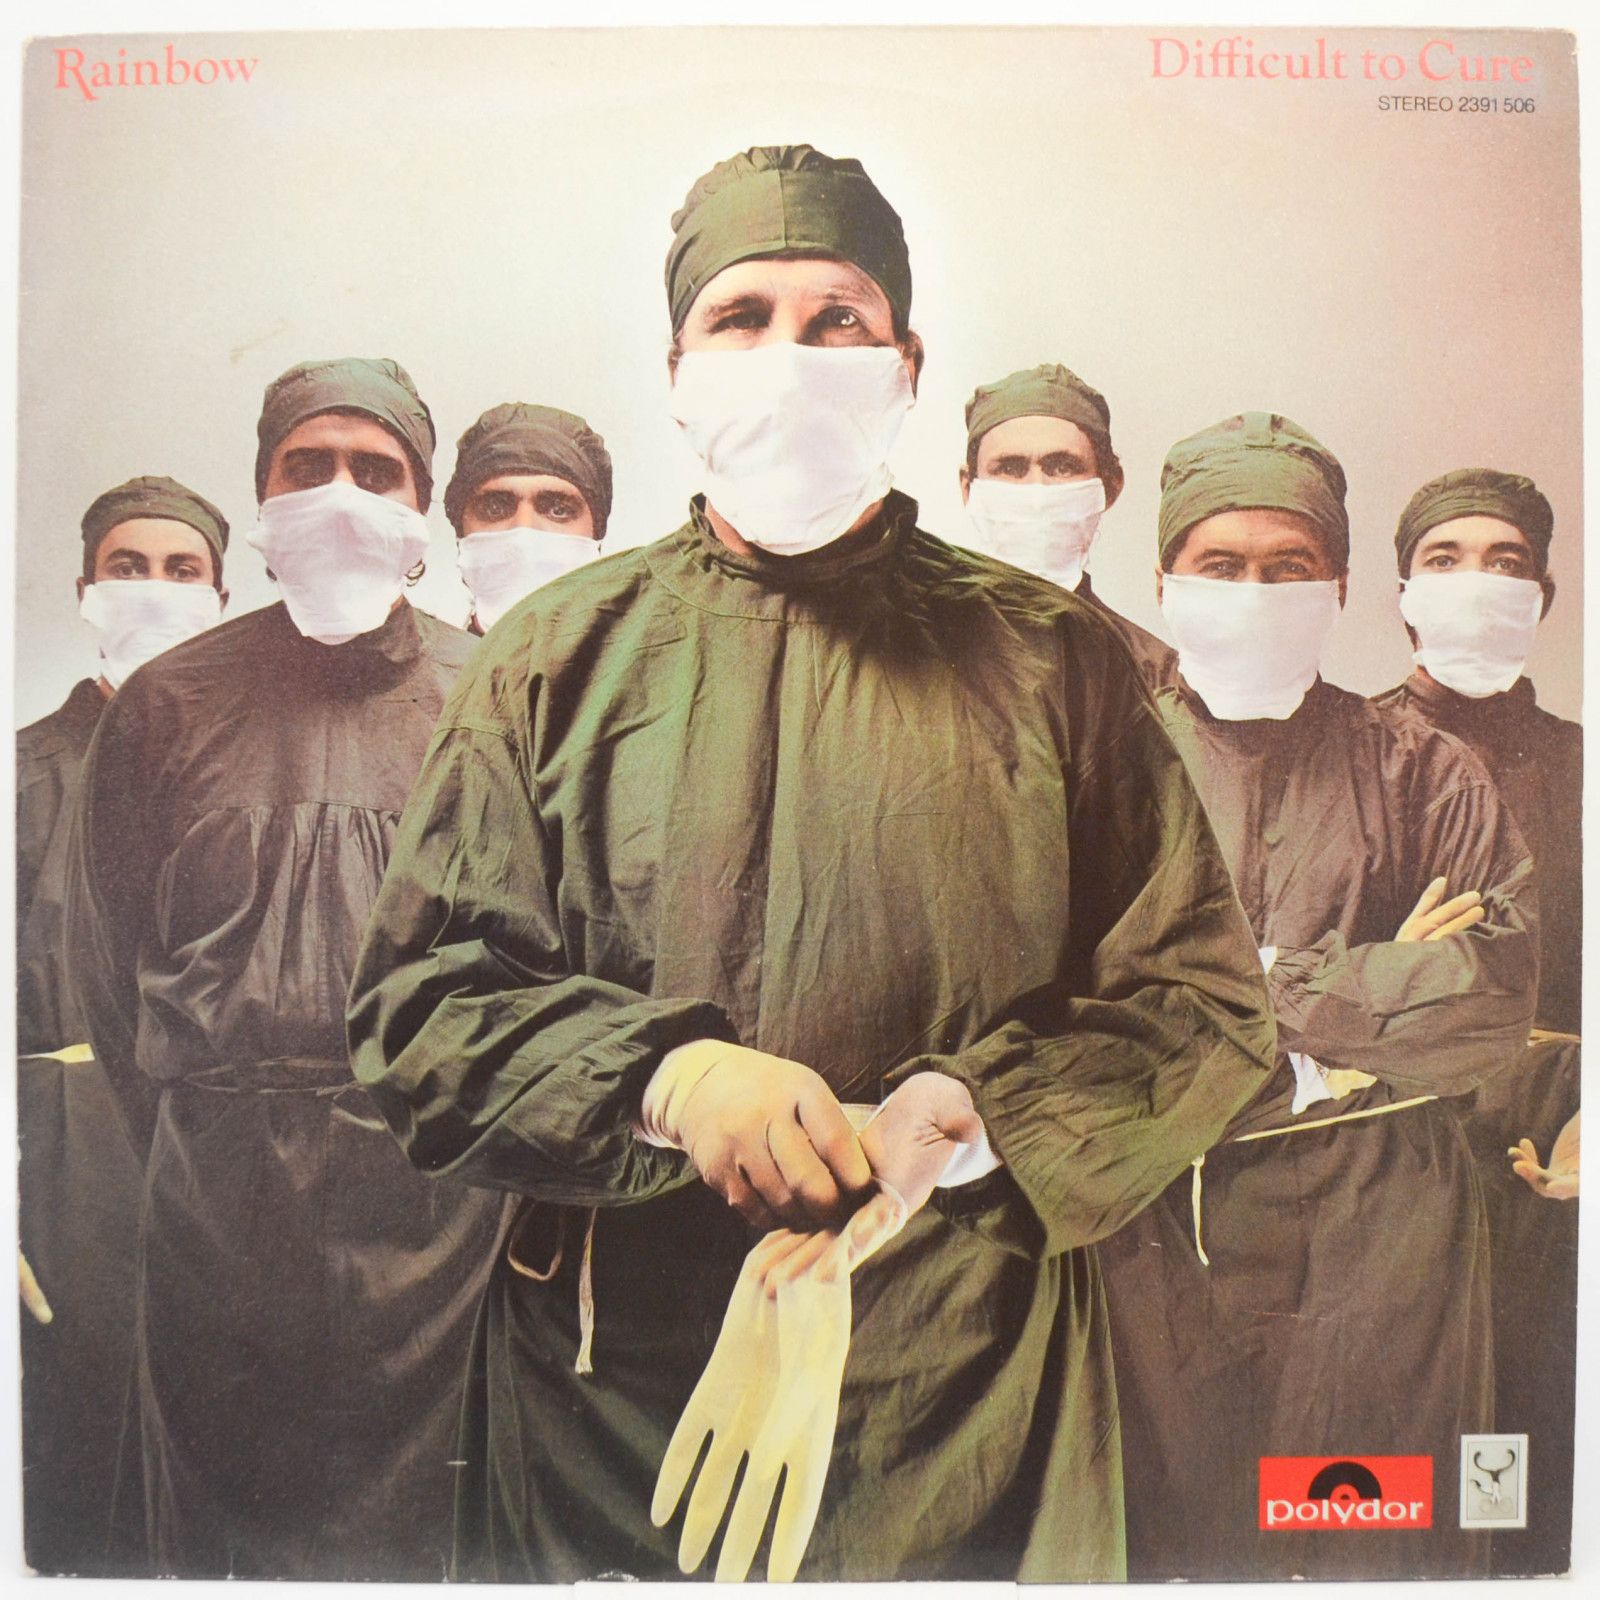 Rainbow — Difficult To Cure, 1981